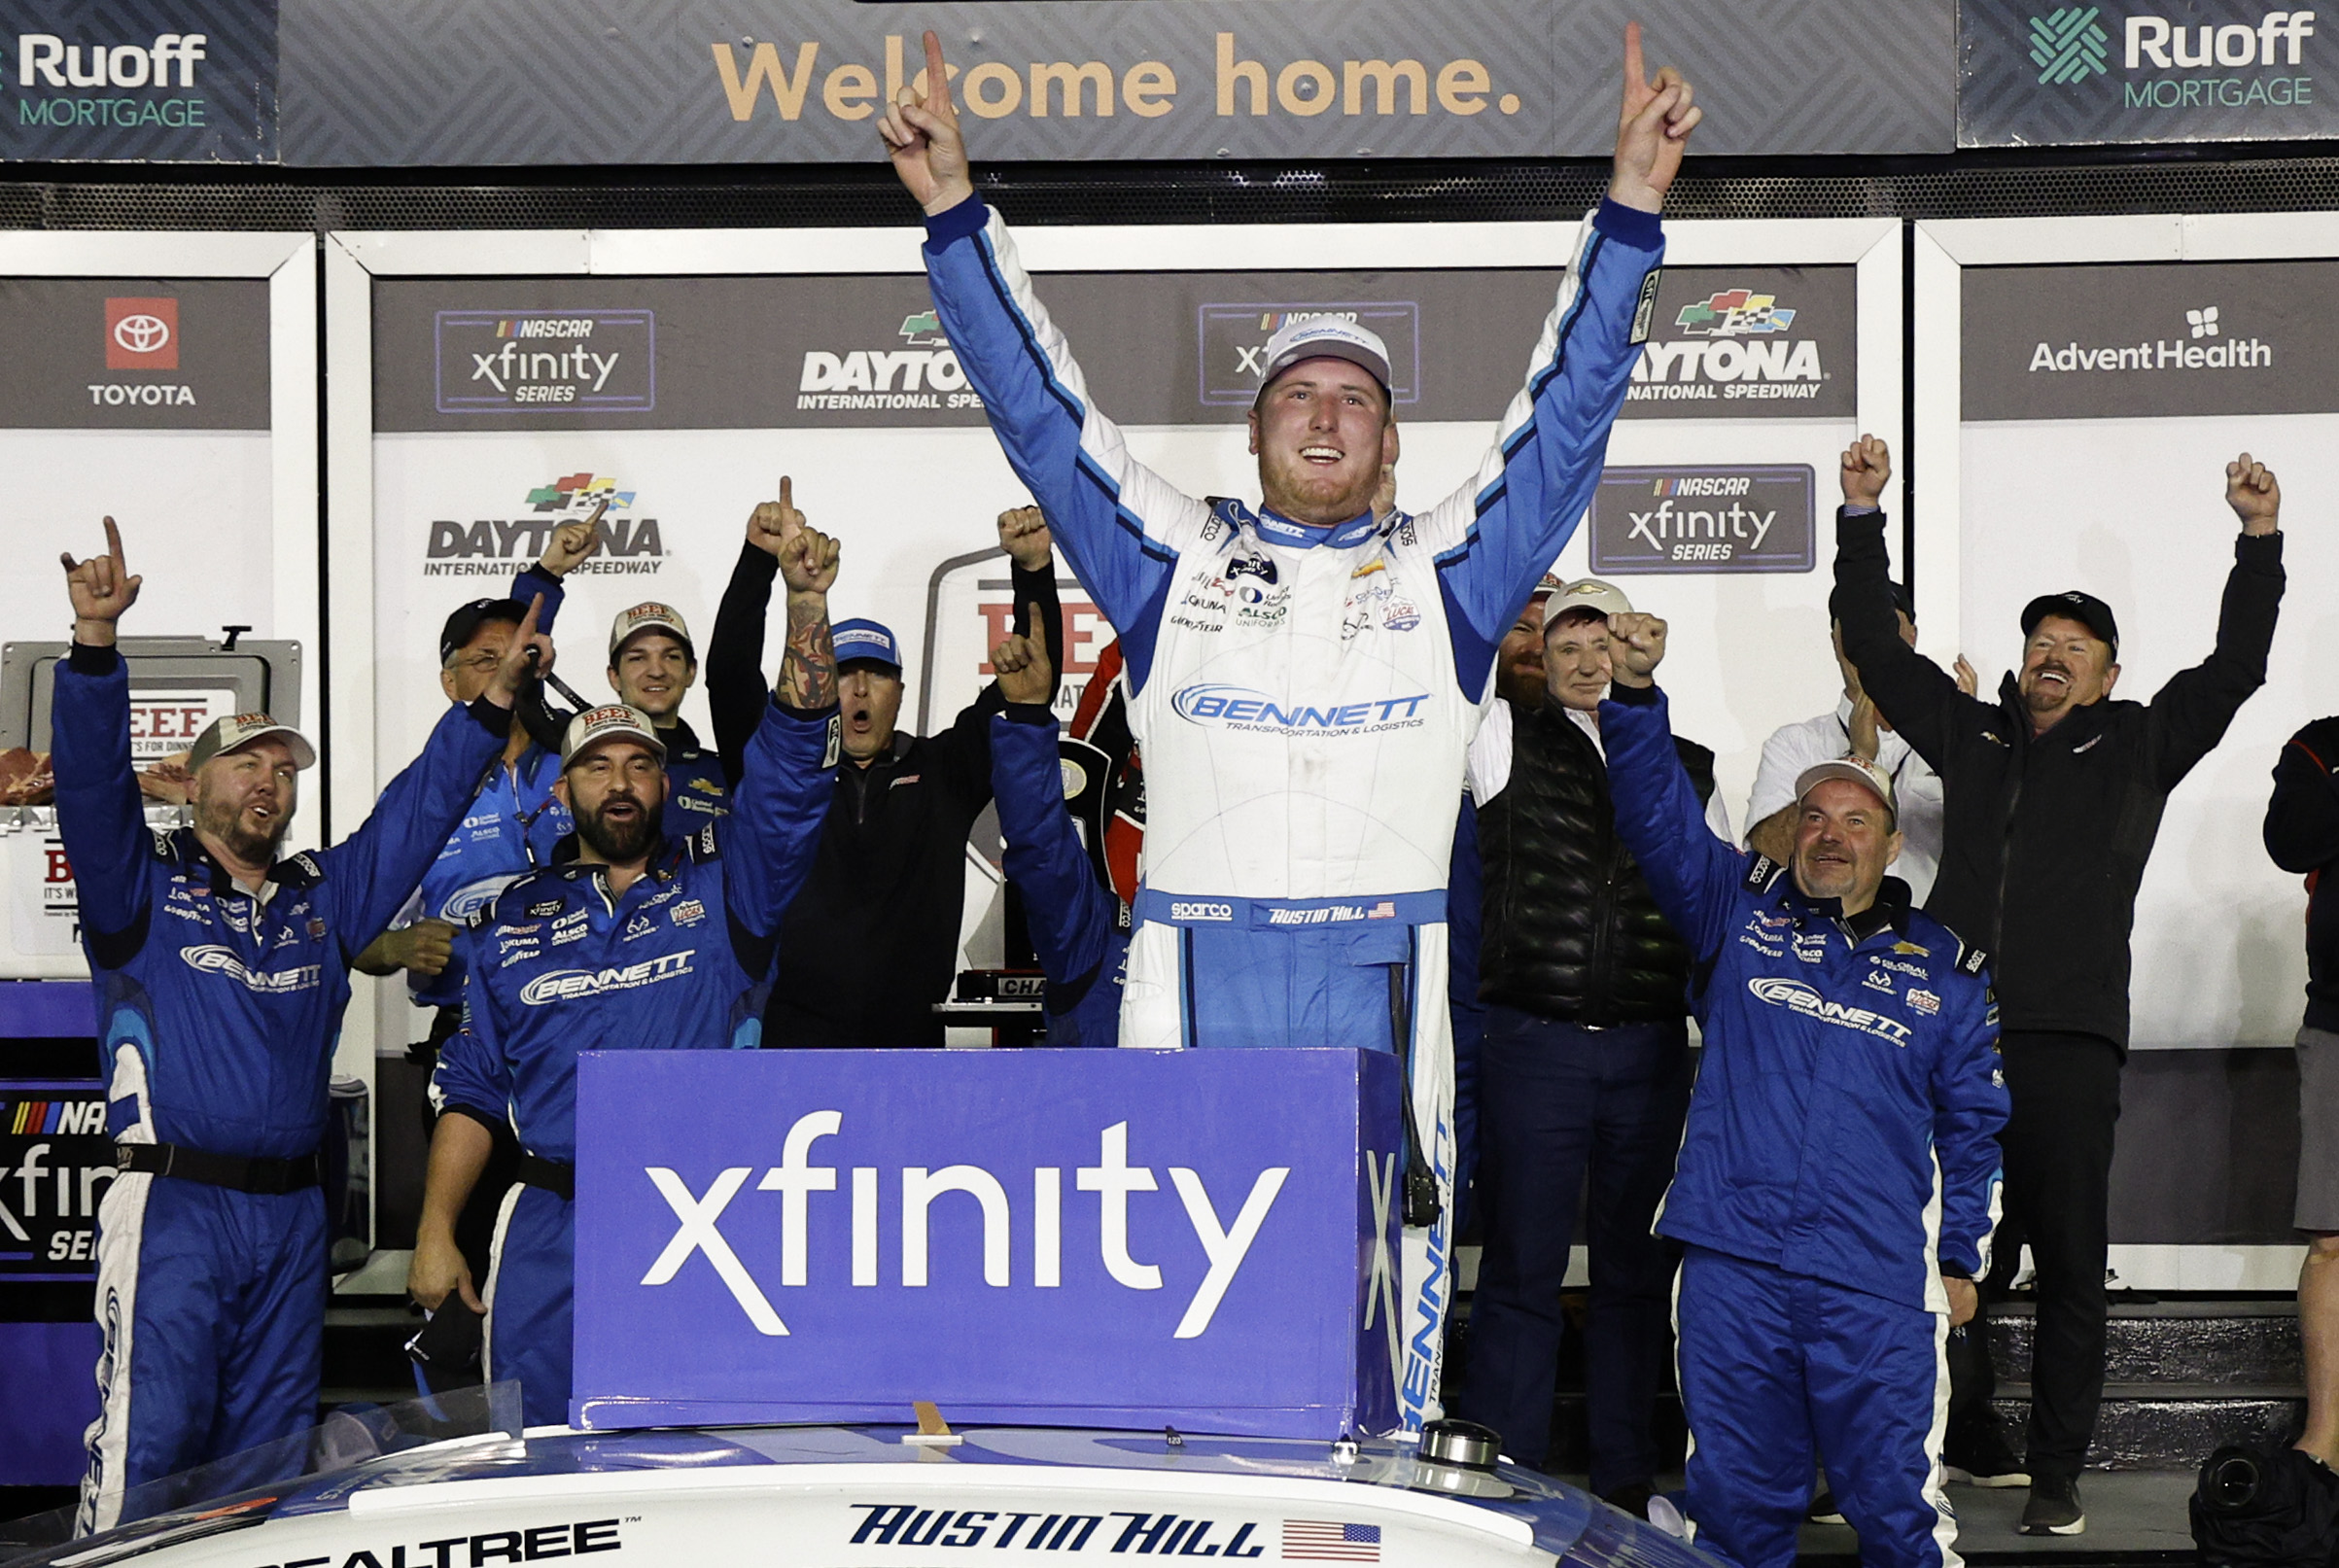 DAYTONA BEACH, FLORIDA - FEBRUARY 18: Austin Hill, driver of the #21 Bennett Transportation Chevrolet, celebrates in victory lane after winning the NASCAR Xfinity Series Beef. It's What's For Dinner. 300 at Daytona International Speedway on February 18, 2023 in Daytona Beach, Florida. (Photo by Chris Graythen/Getty Images)